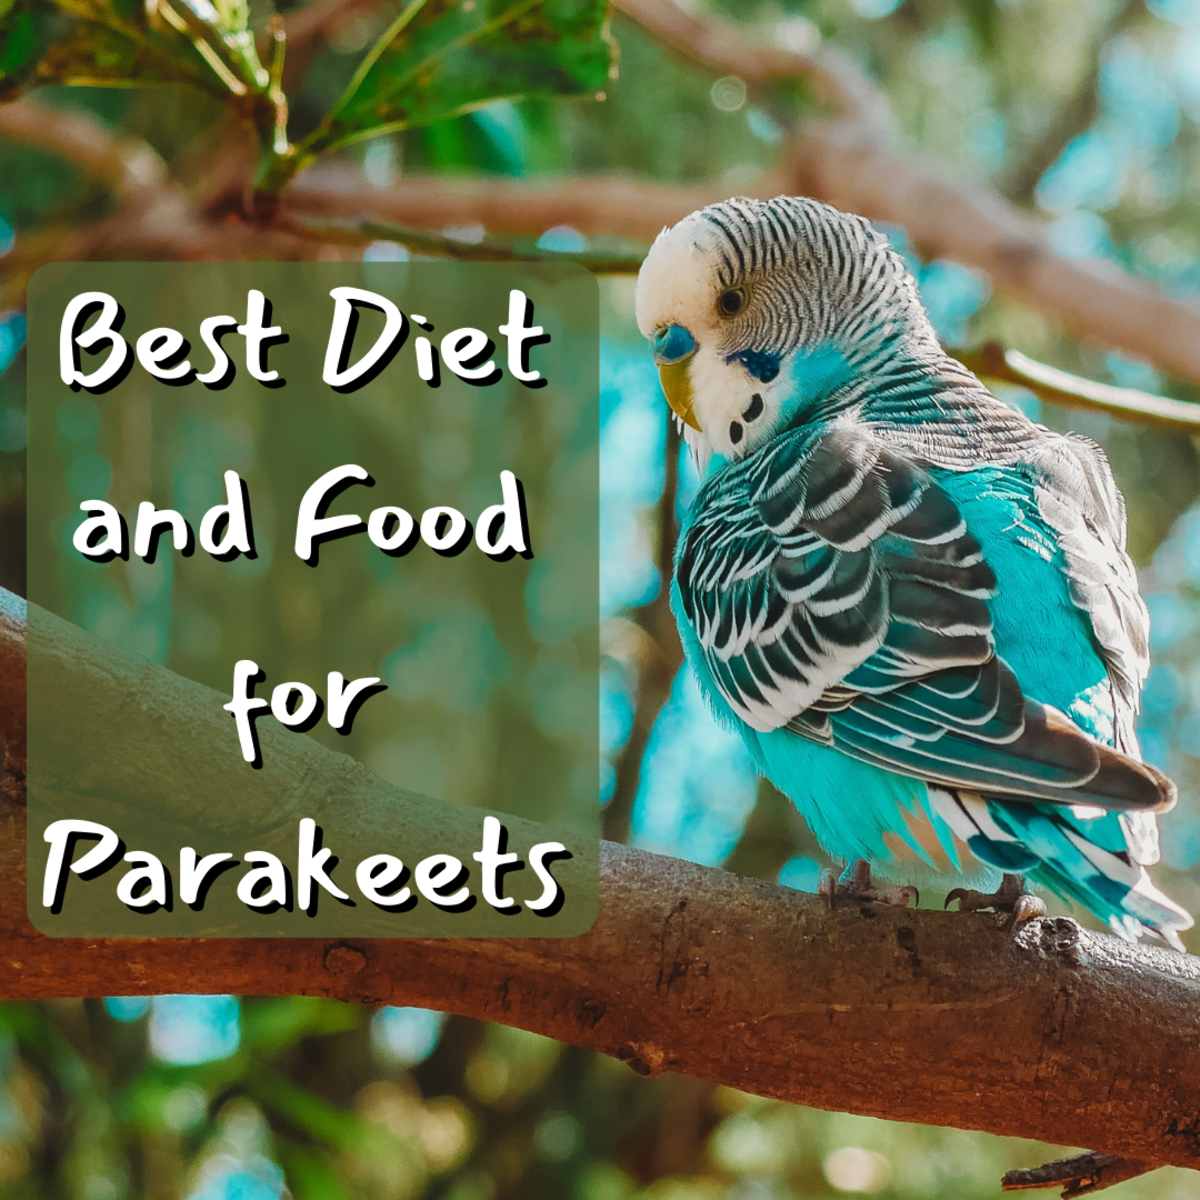 Wondering what to feed parakeets? Read on to learn all about the best food for parakeets!